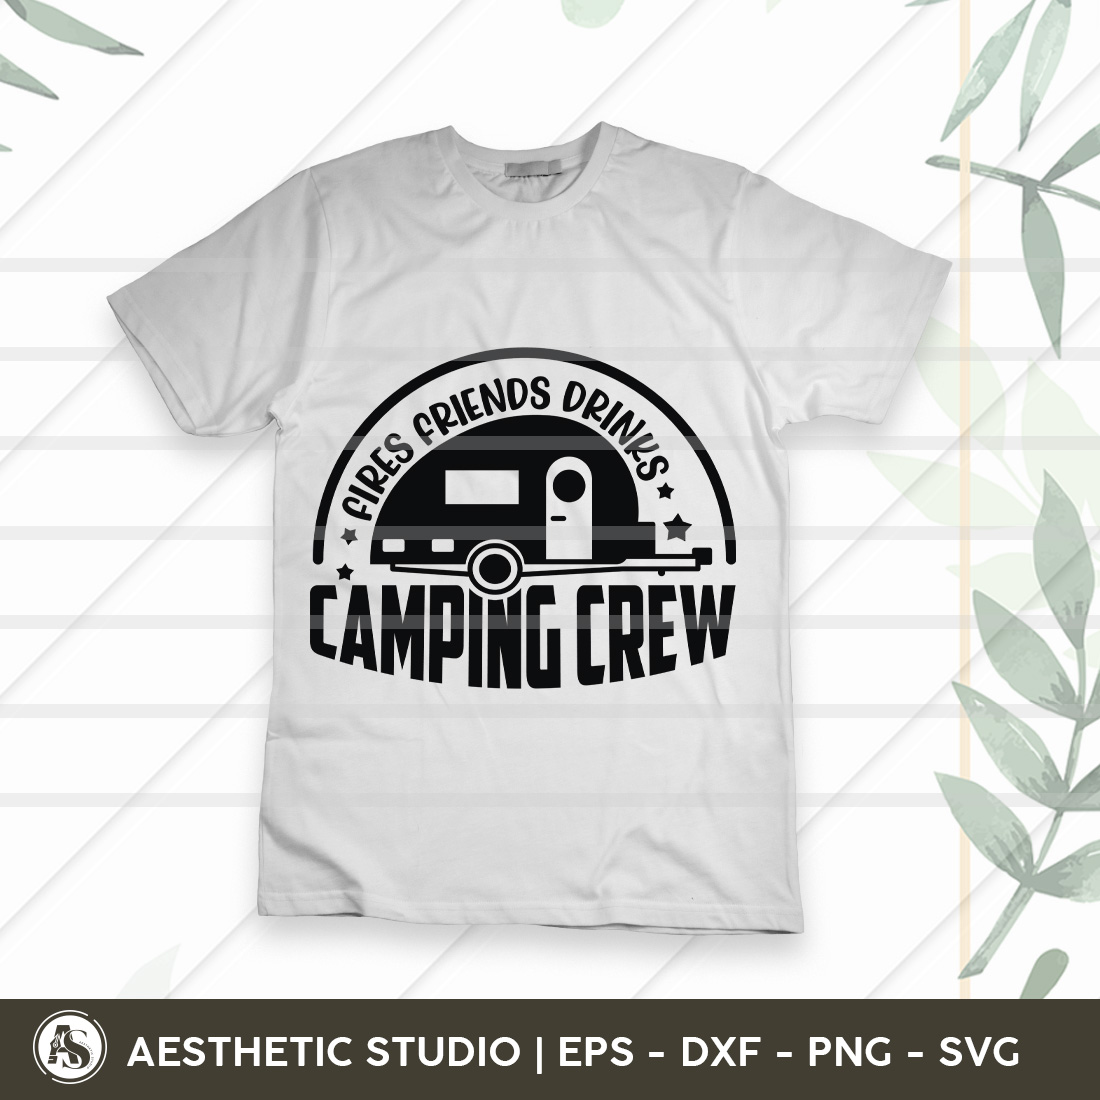 Fries Friends Drinks Camping Crew, Adventure, Camp Life, Camping Svg, Typography, Camping Quotes, Camping Cut File, Funny Camping, Camping T-shirt Design, Svg, Eps, Dxf, Png, Cut file preview image.